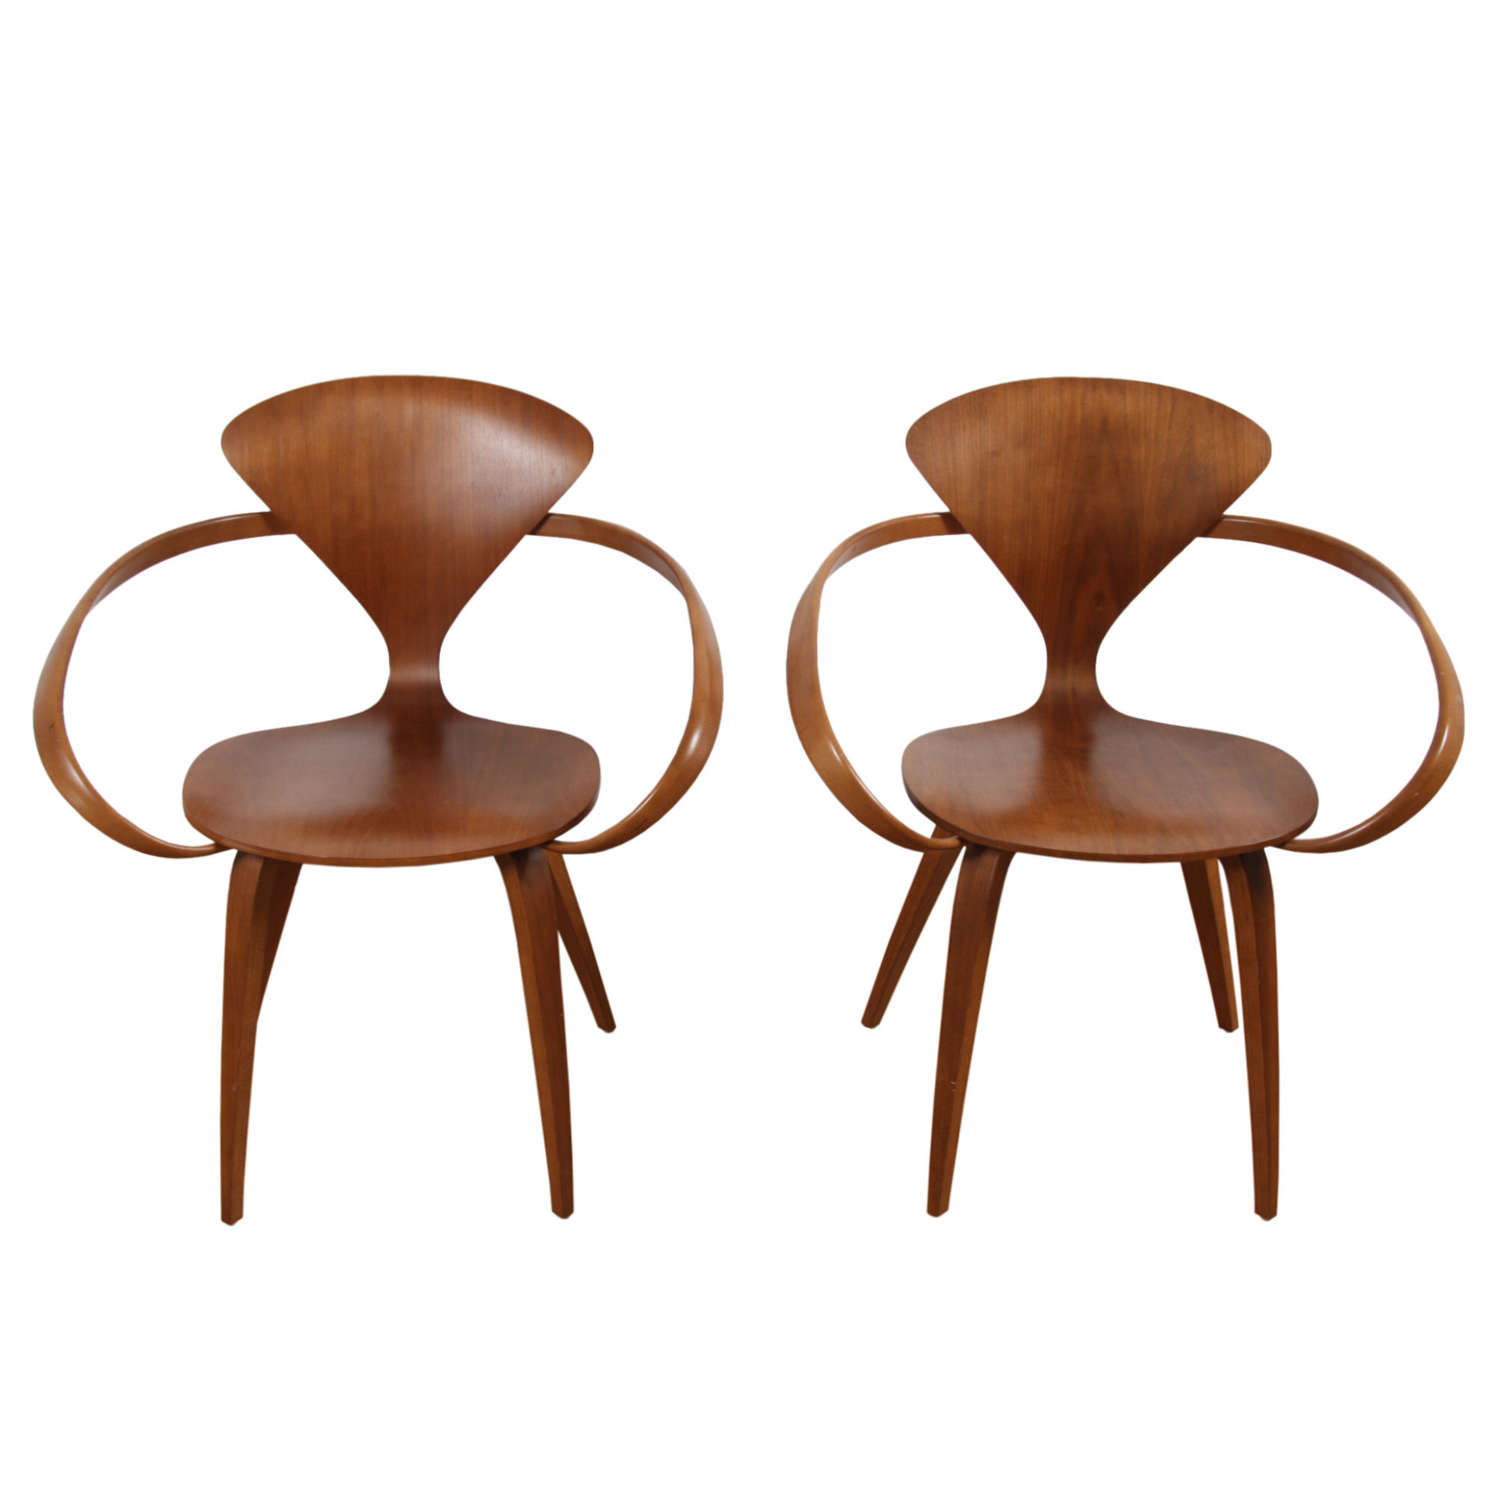 Pair of Classic Cherner Armchairs